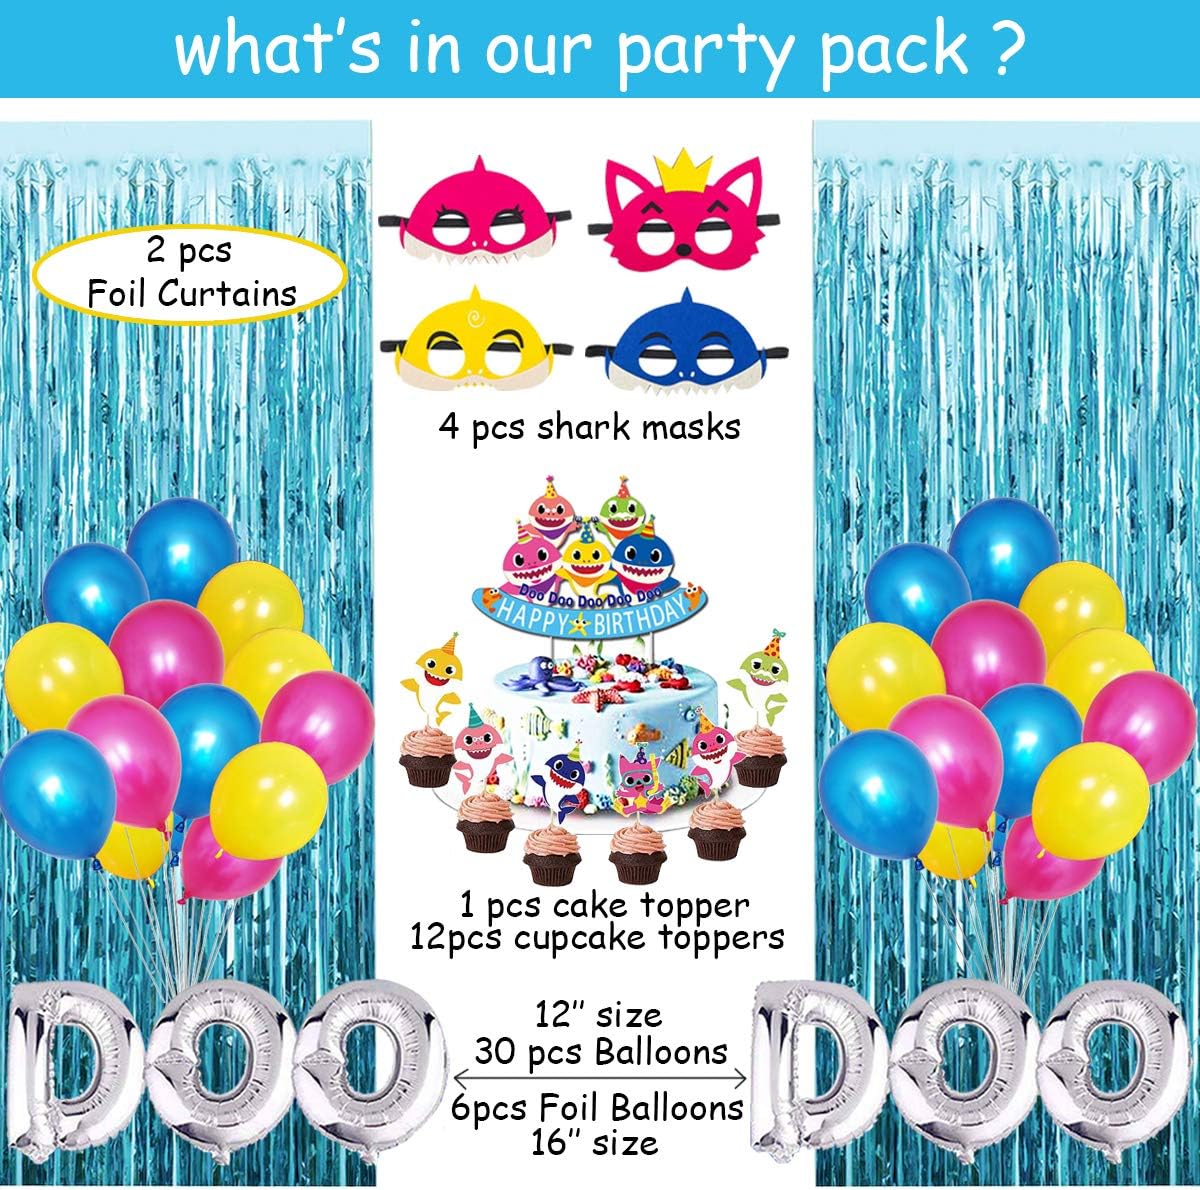 Shark Party Supplies for Baby, 77 pcs Shark Theme Birthday Party Decorations for Kids - Includes Shark Masks, Hanging Swirl, Little Shark Balloons, Foil Curtains, Table Cloth, Banner, Toppers